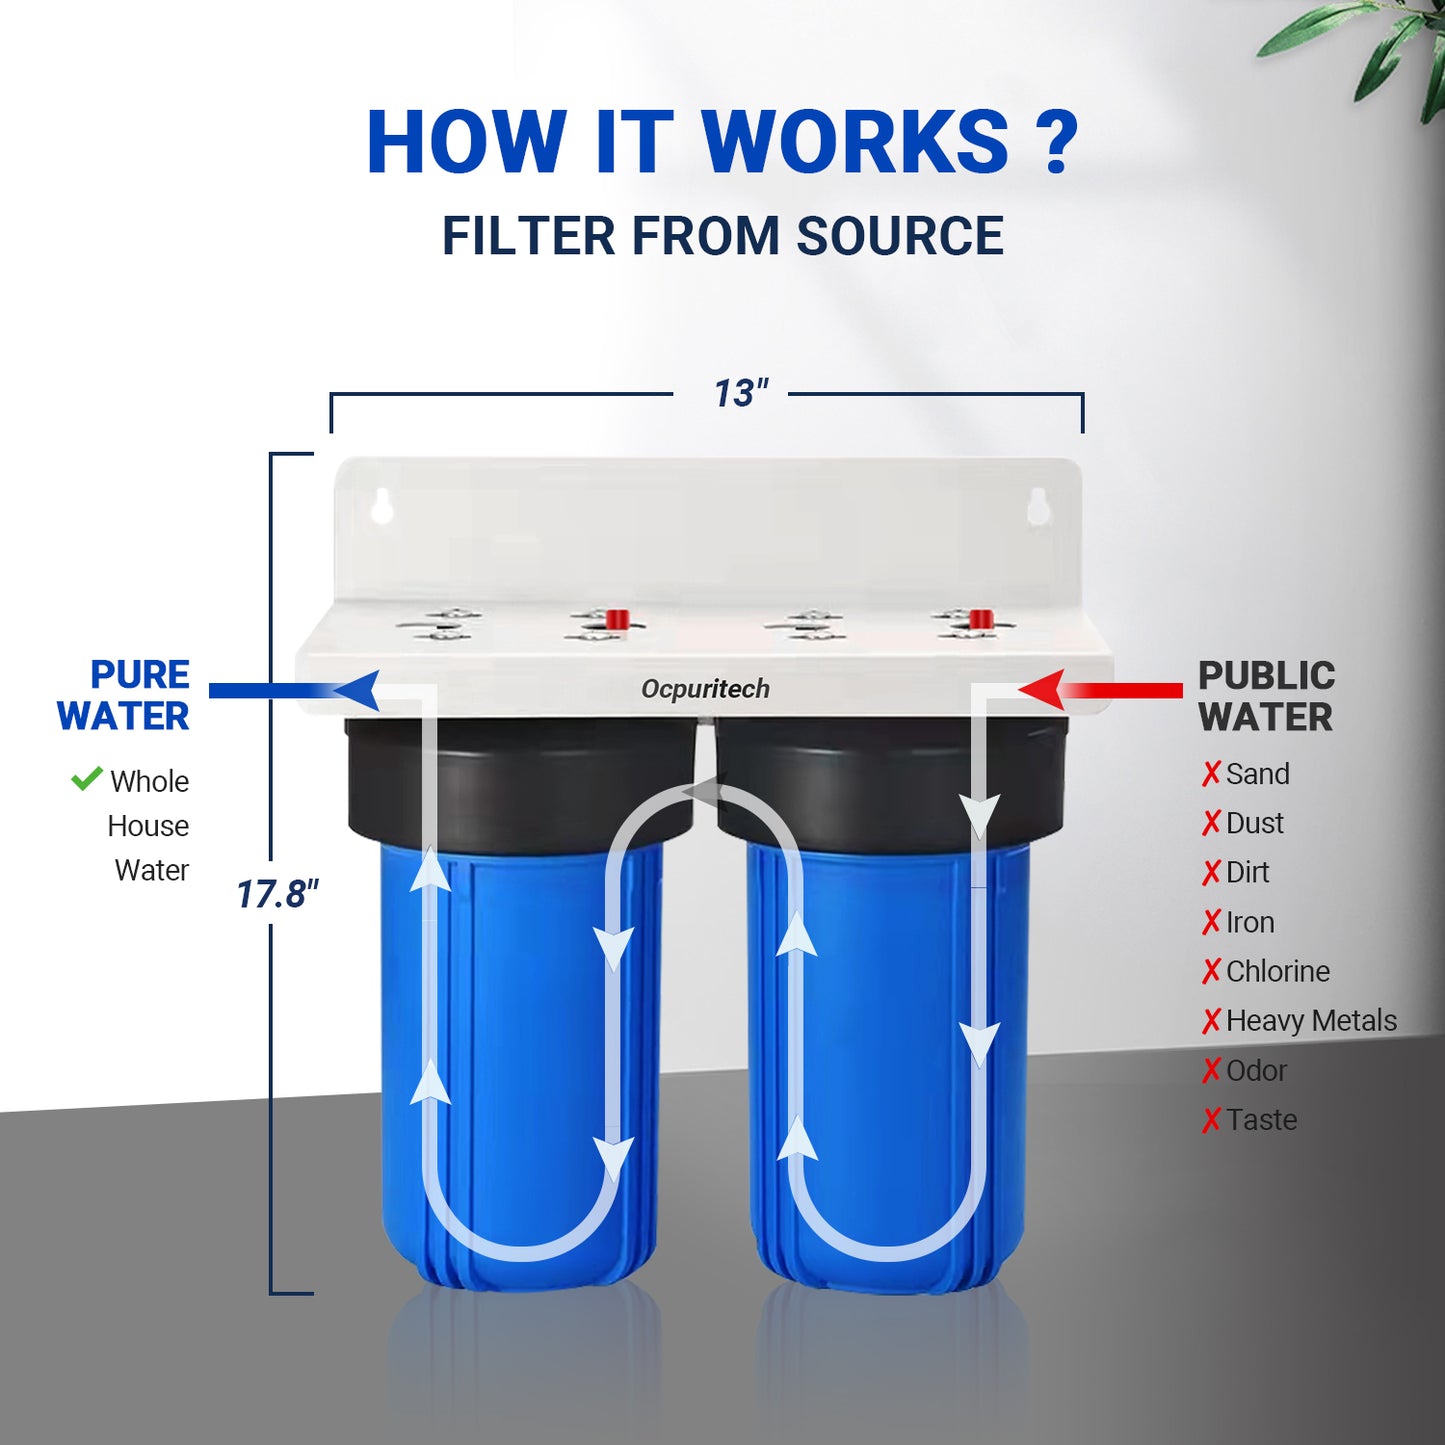 Easy DIY Installation of Ocpuritech Whole House Water Filter